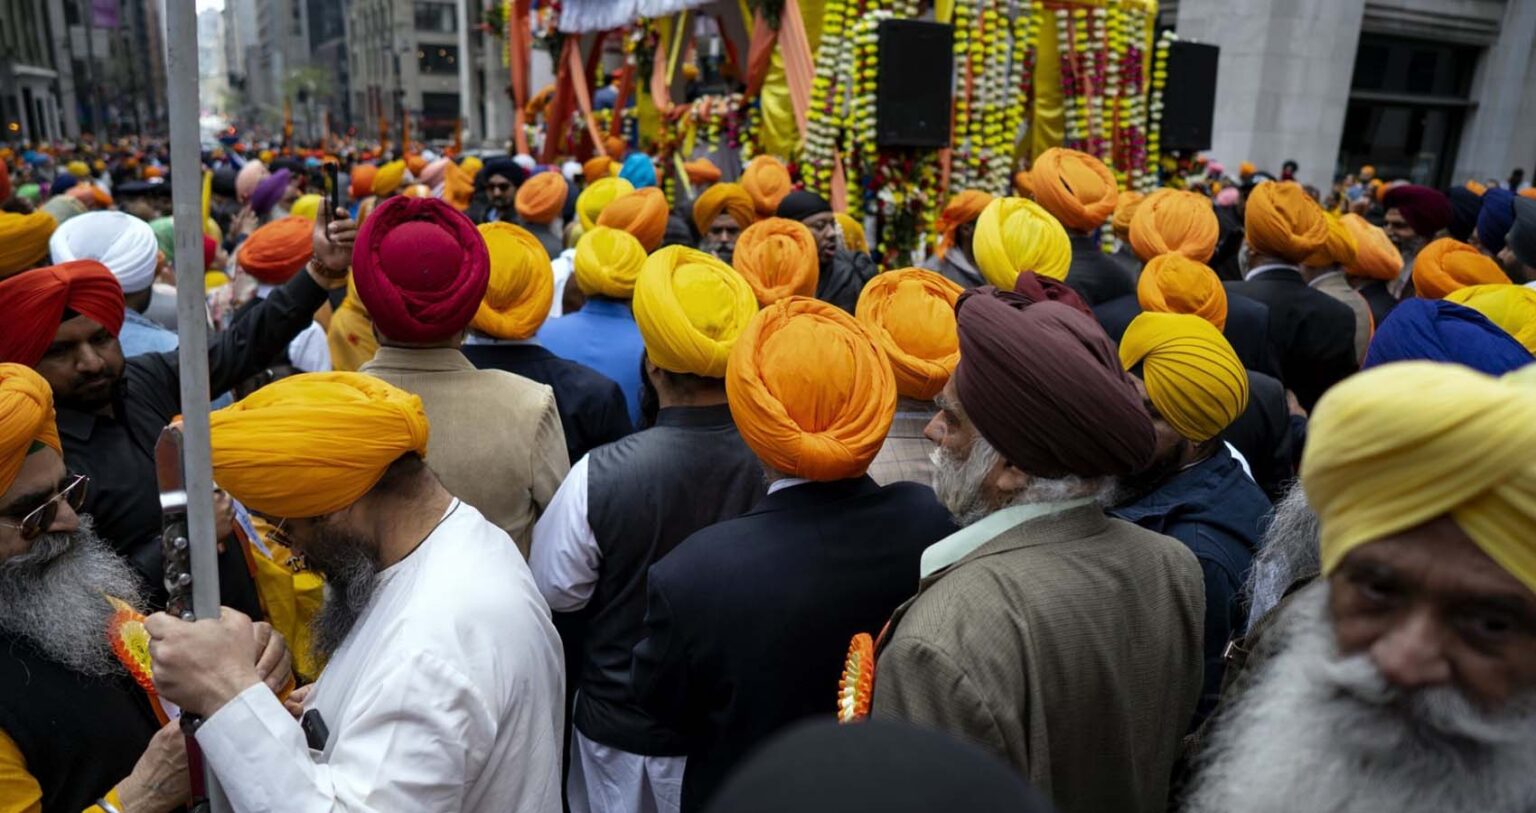 34th Sikh Day Parade In New York Showcases Sikh Traditions, Culture